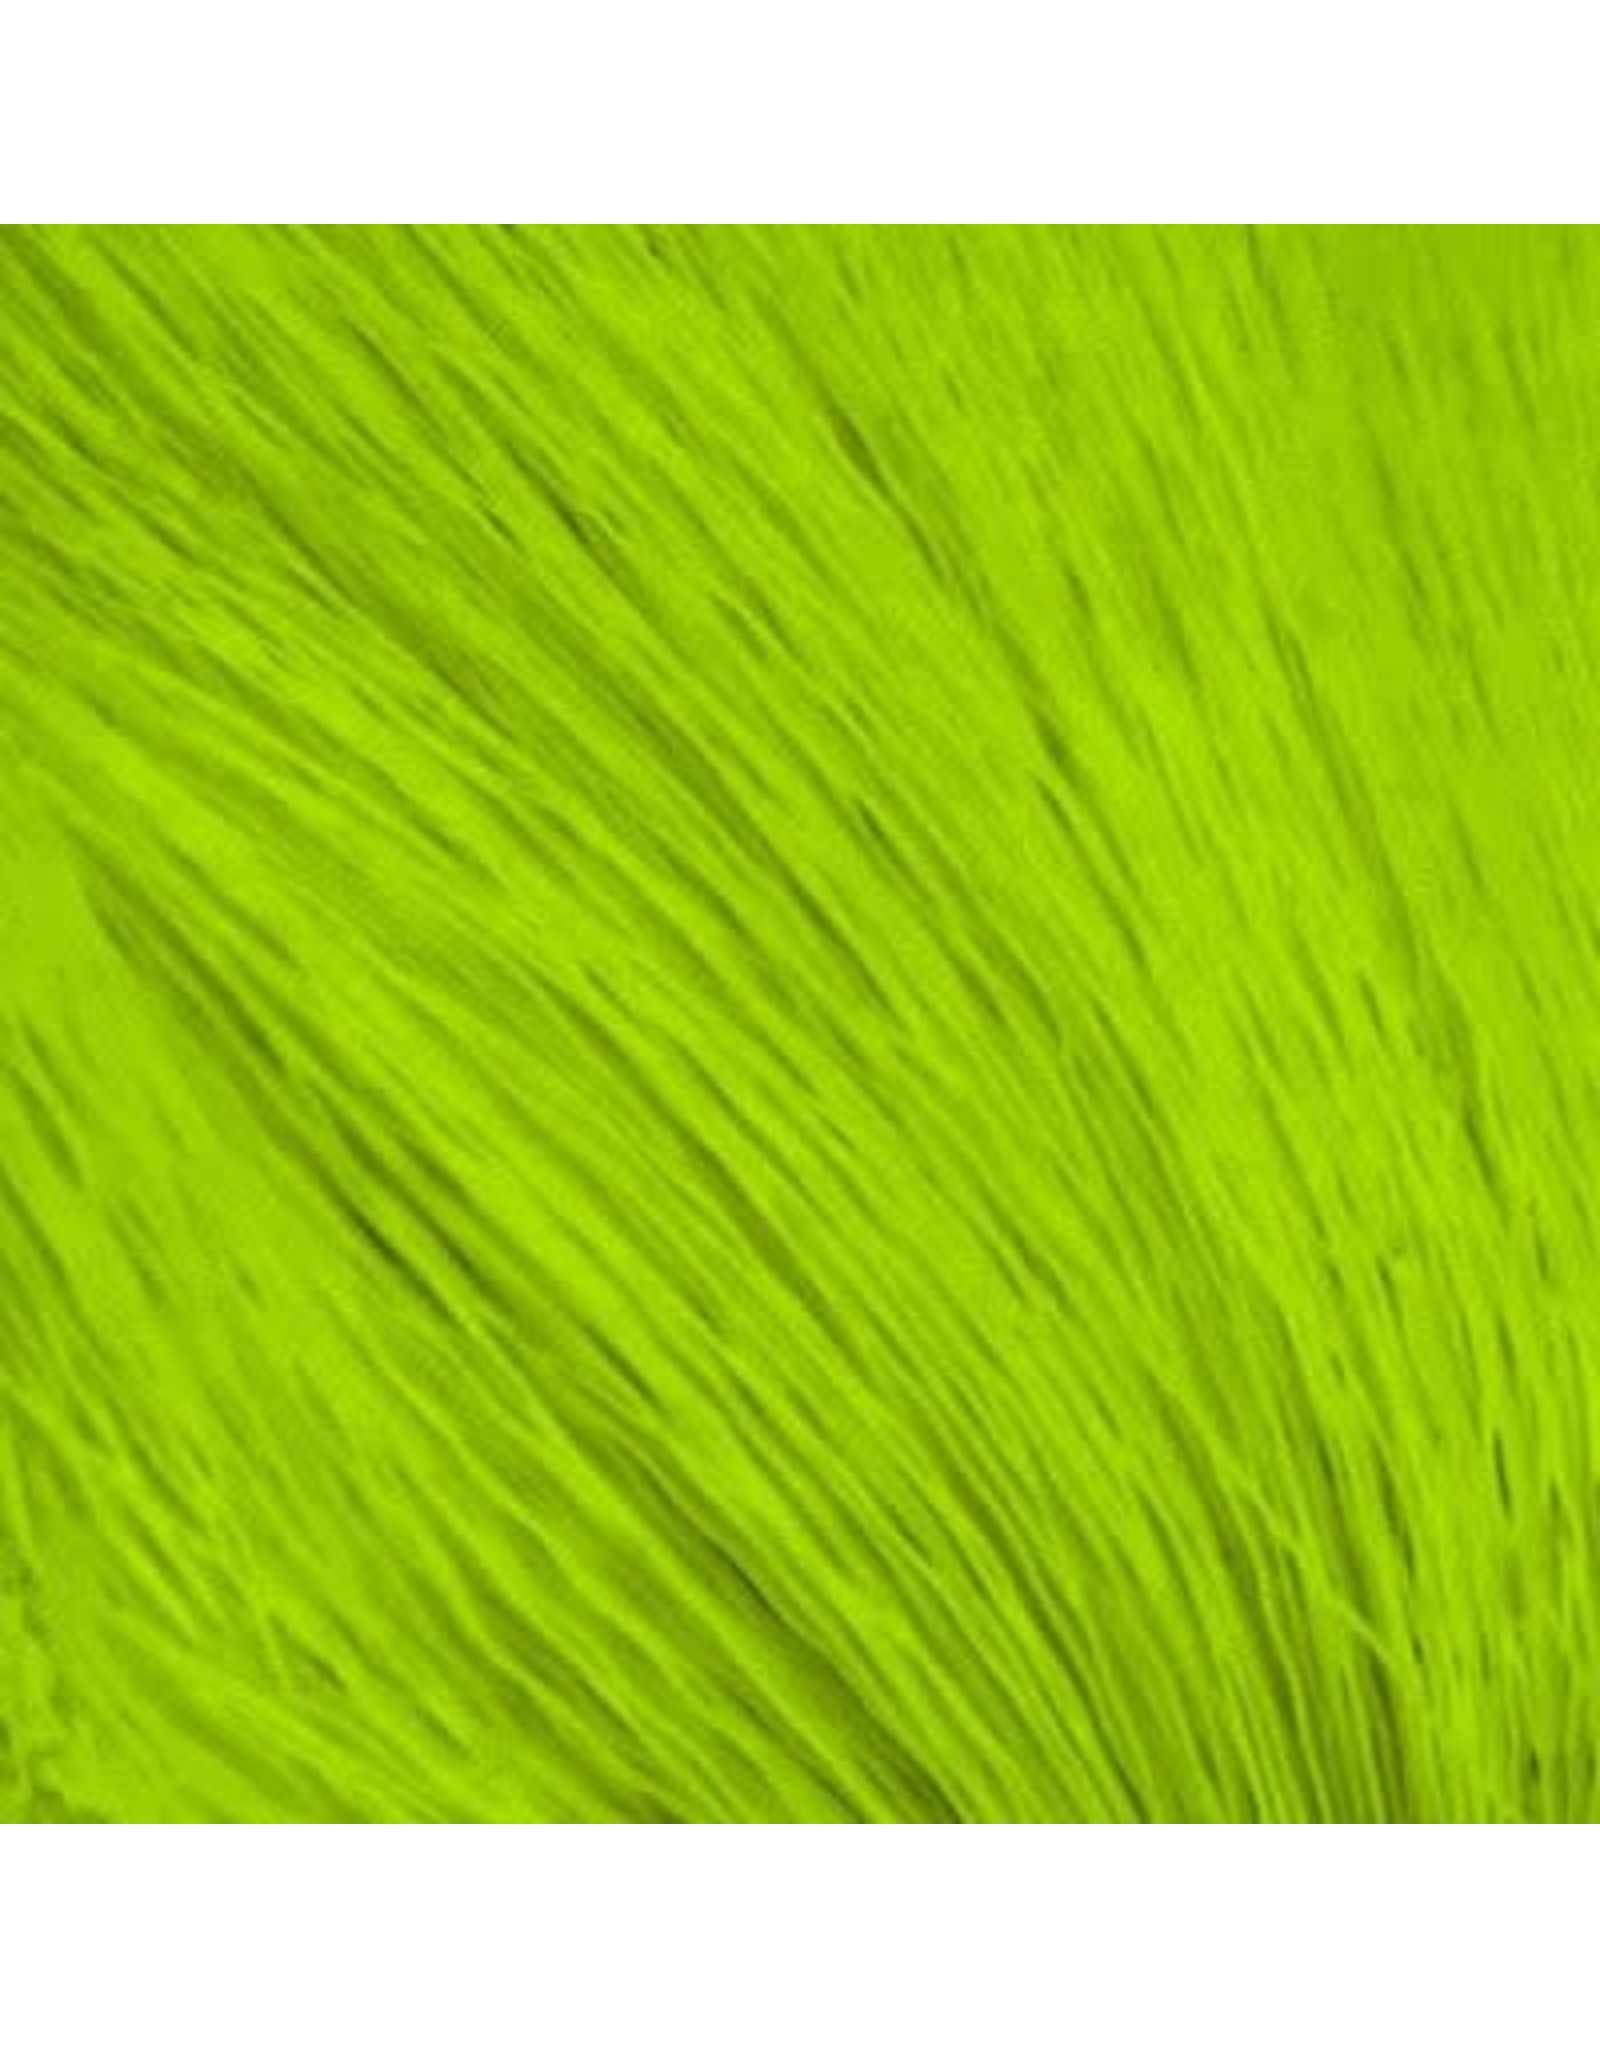 SHOR SHOR Deer Body Hair Dyed from White - Chartreuse